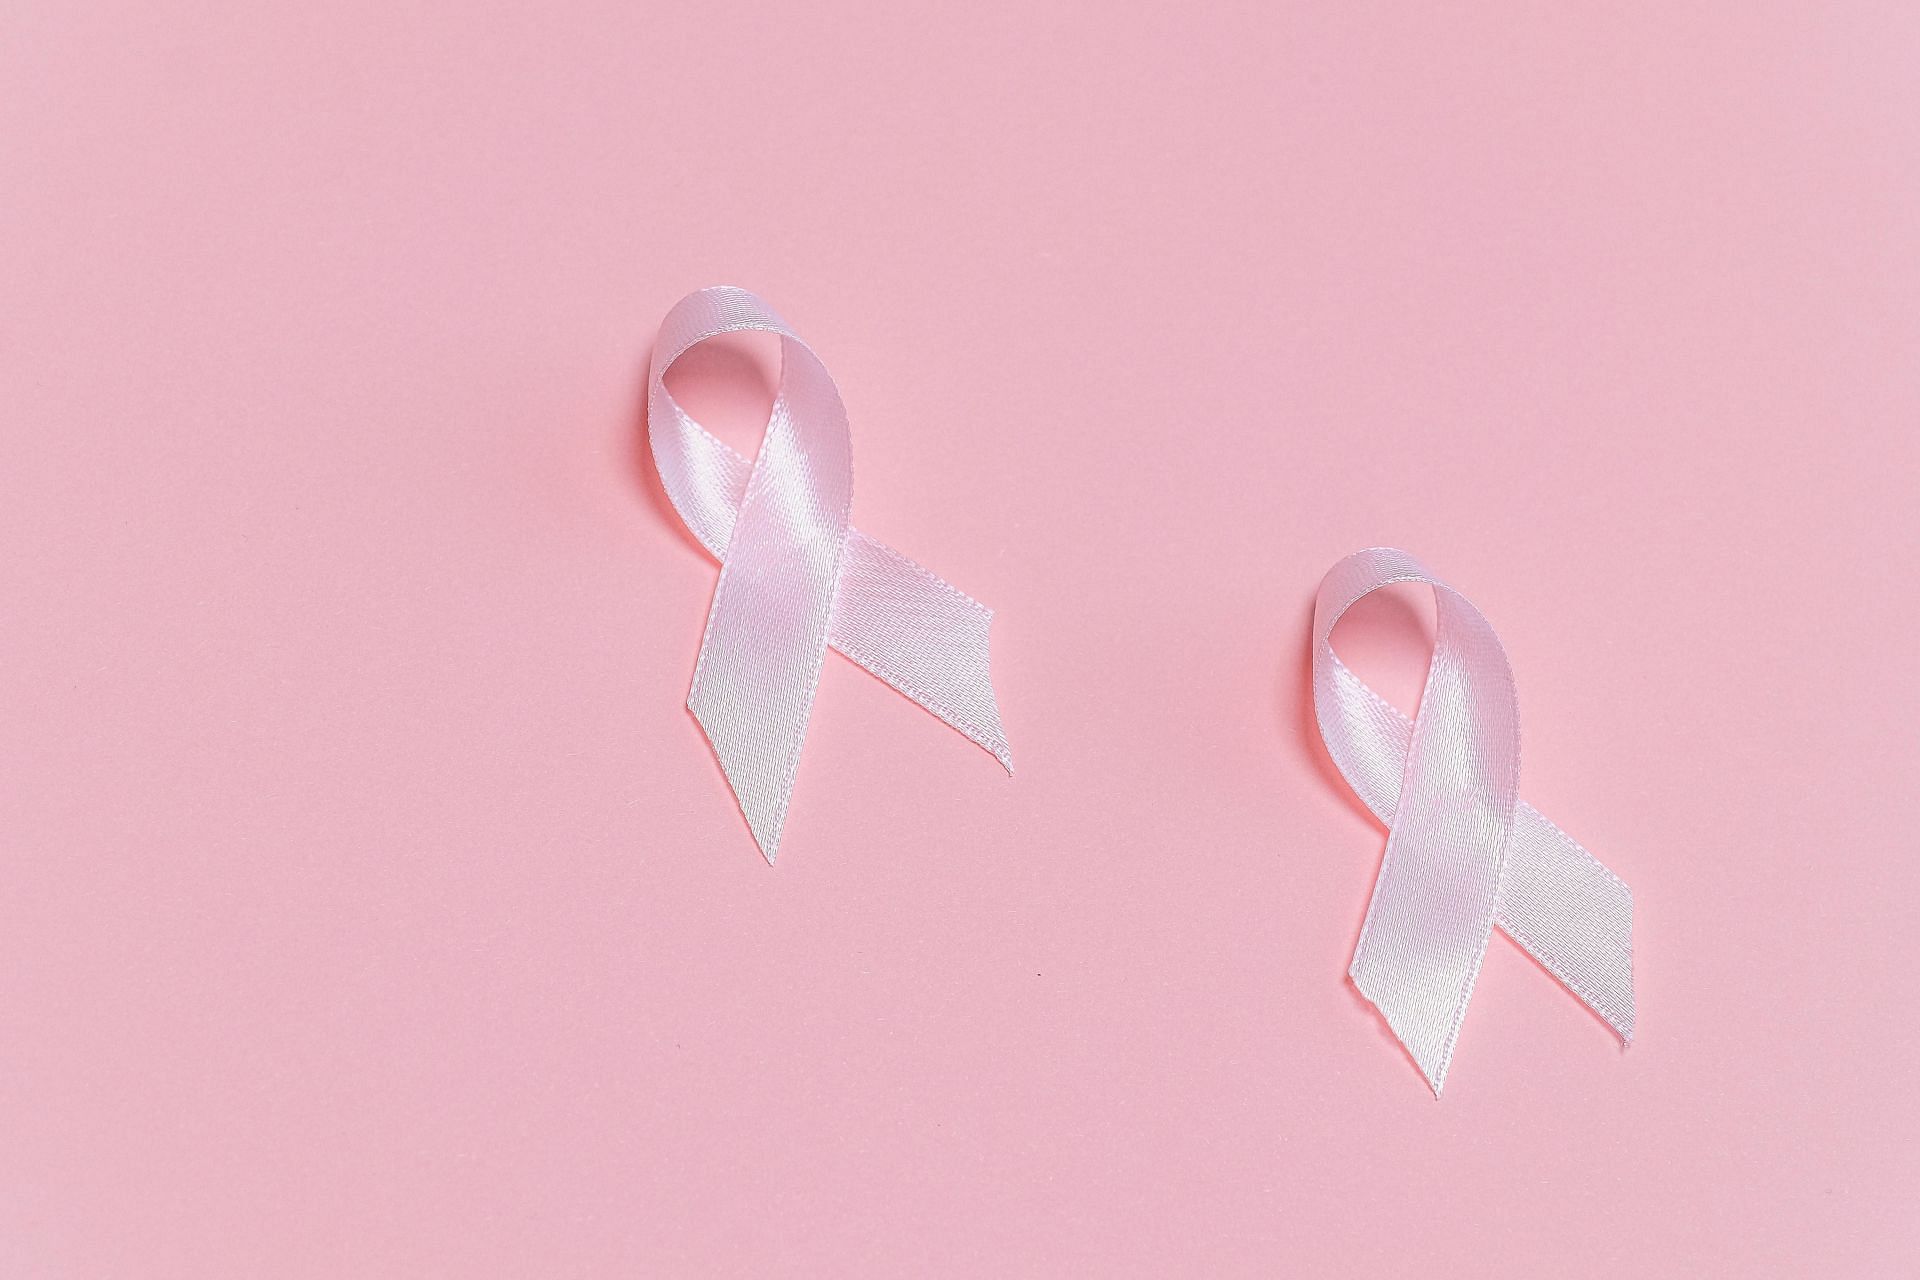 Importance of cancer prevention (image sourced via Pexels / Photo by anna shvets)